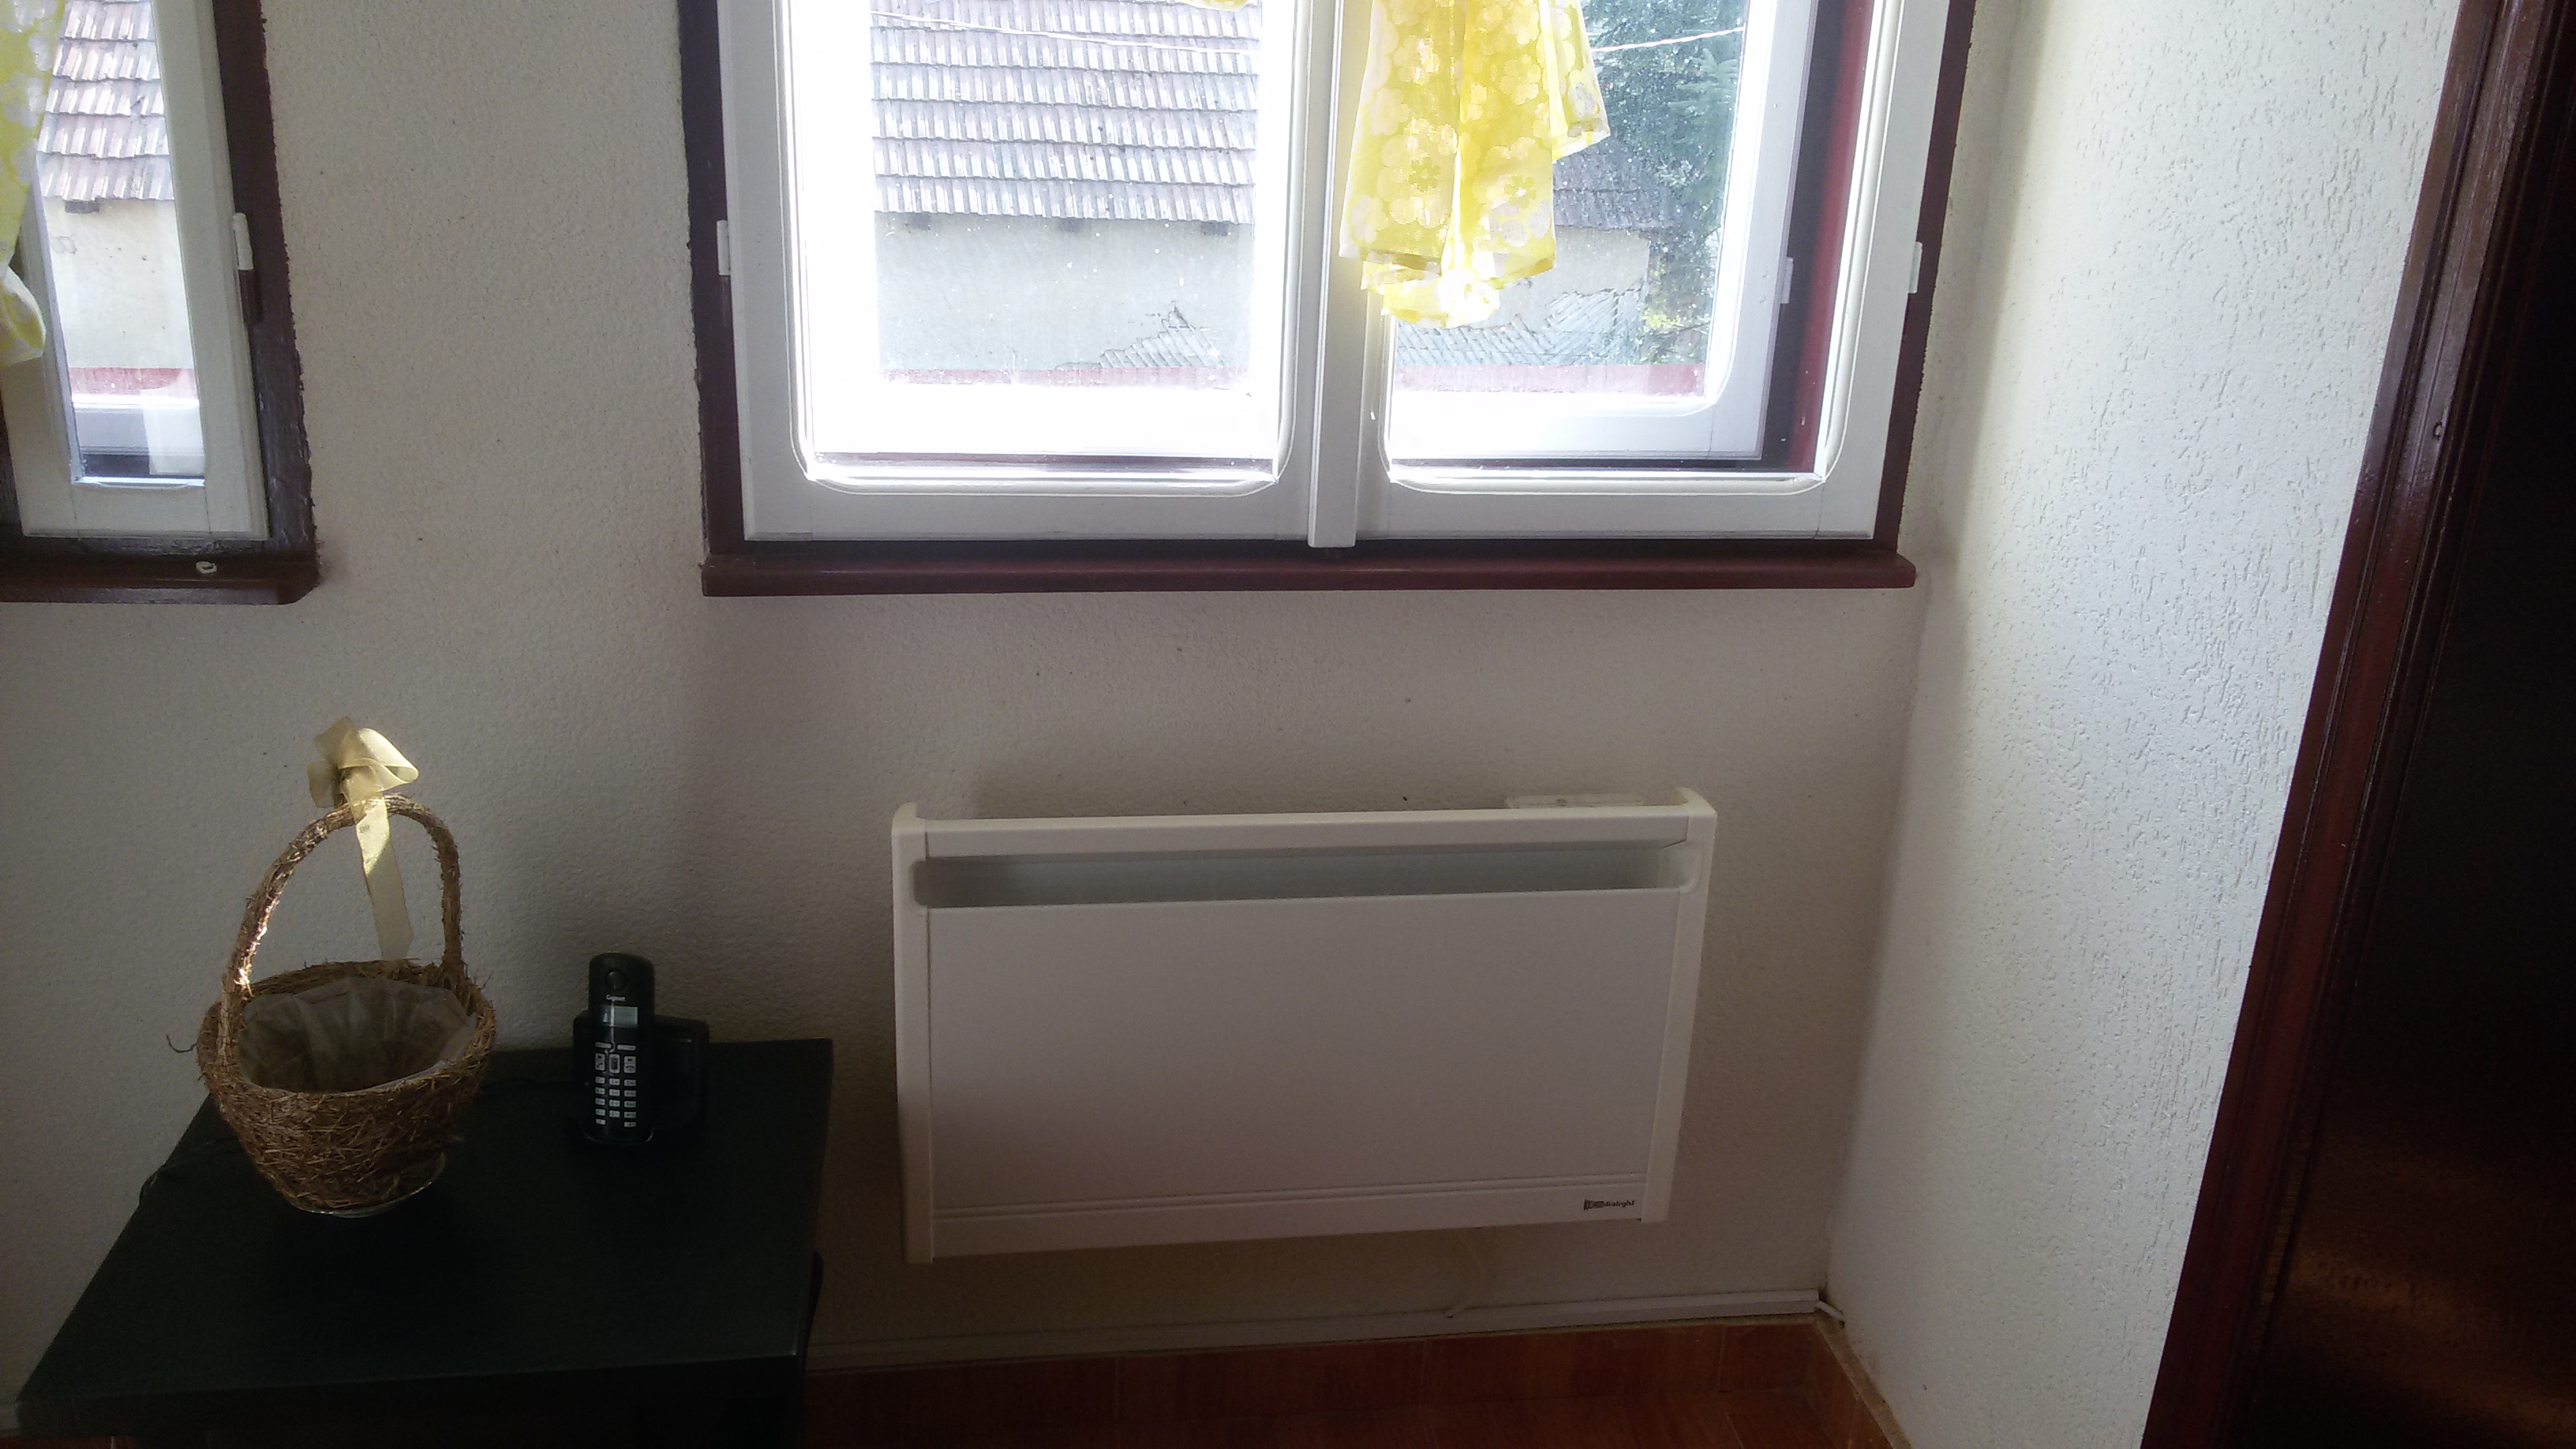 Convector electric Stylo 10